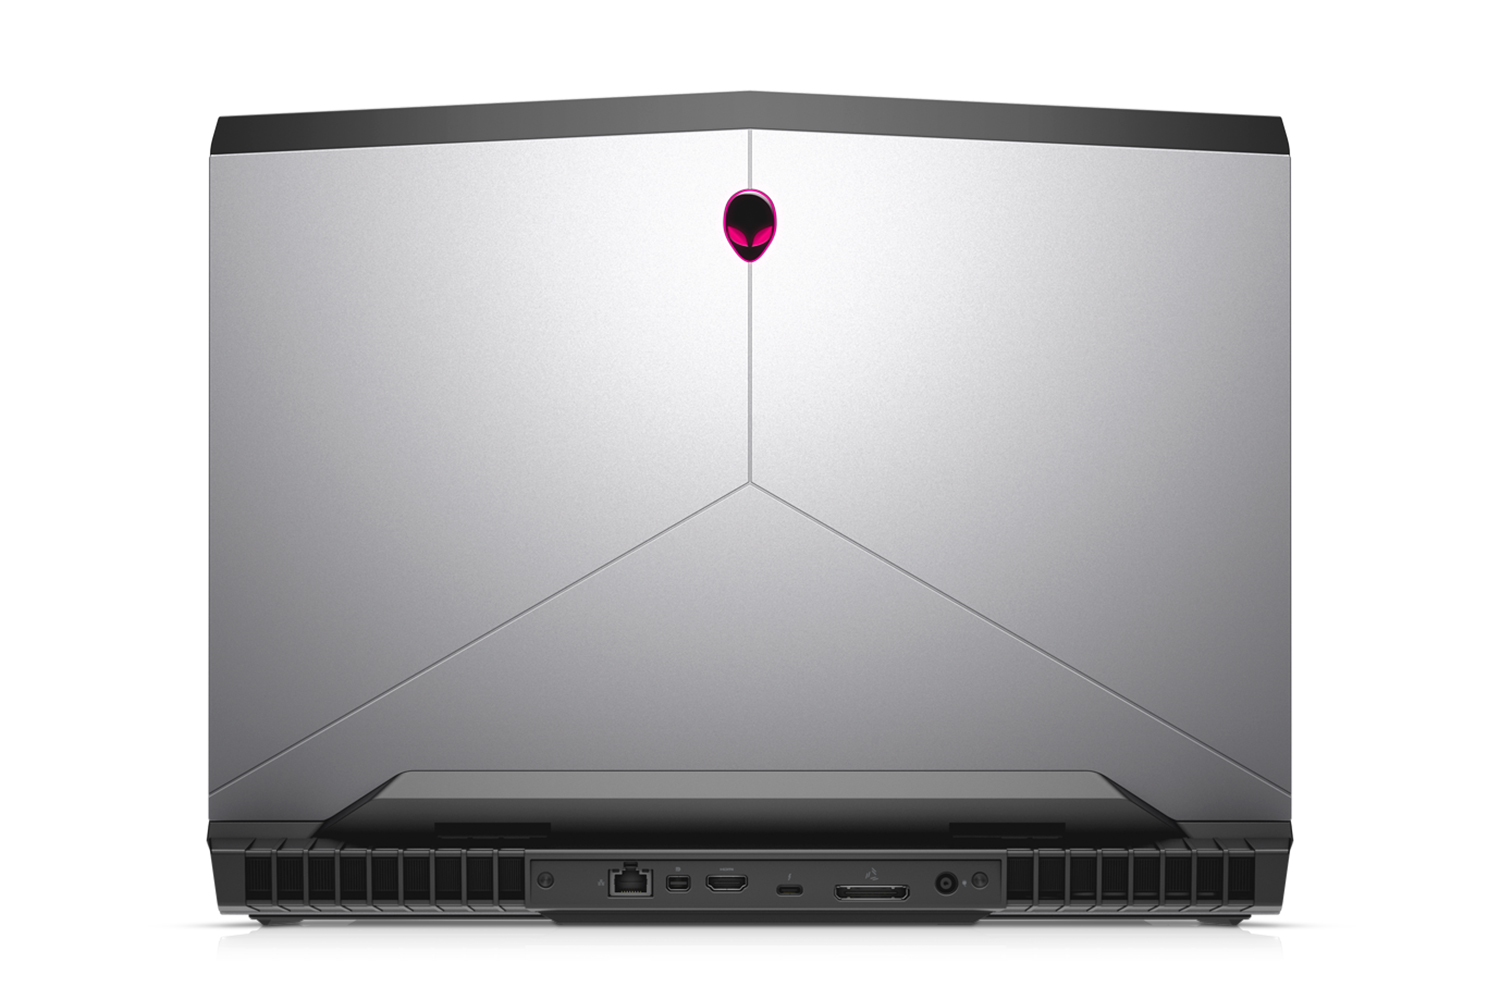 dell alienware inspiron 7000 gaming laptops refresh intel seventh gen cpu aw 17 08